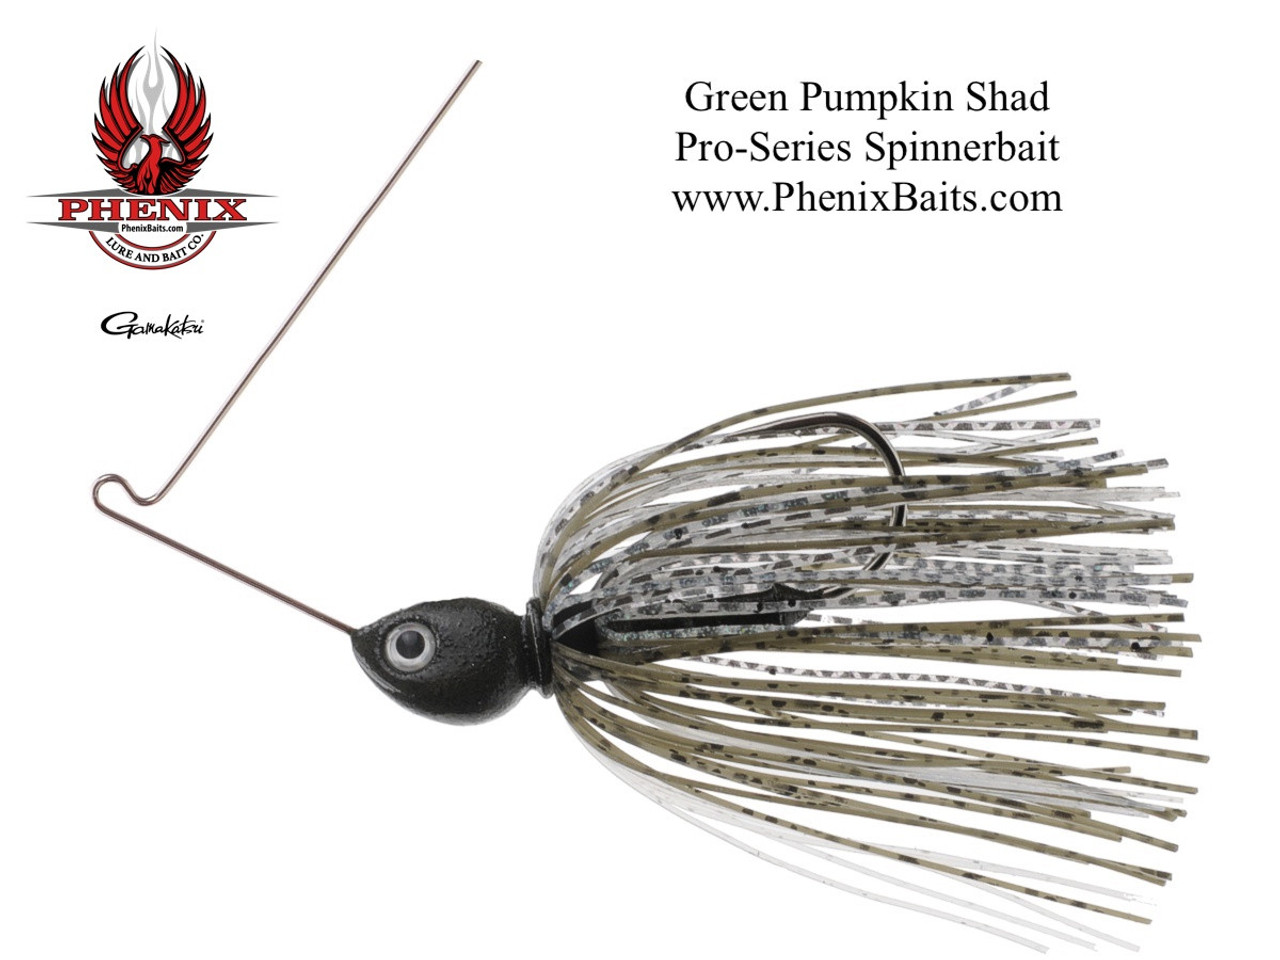 Phenix Pro-Series Spinnerbait - Green Pumpkin Shad with Colorado Gold and  Indiana Gold Blades